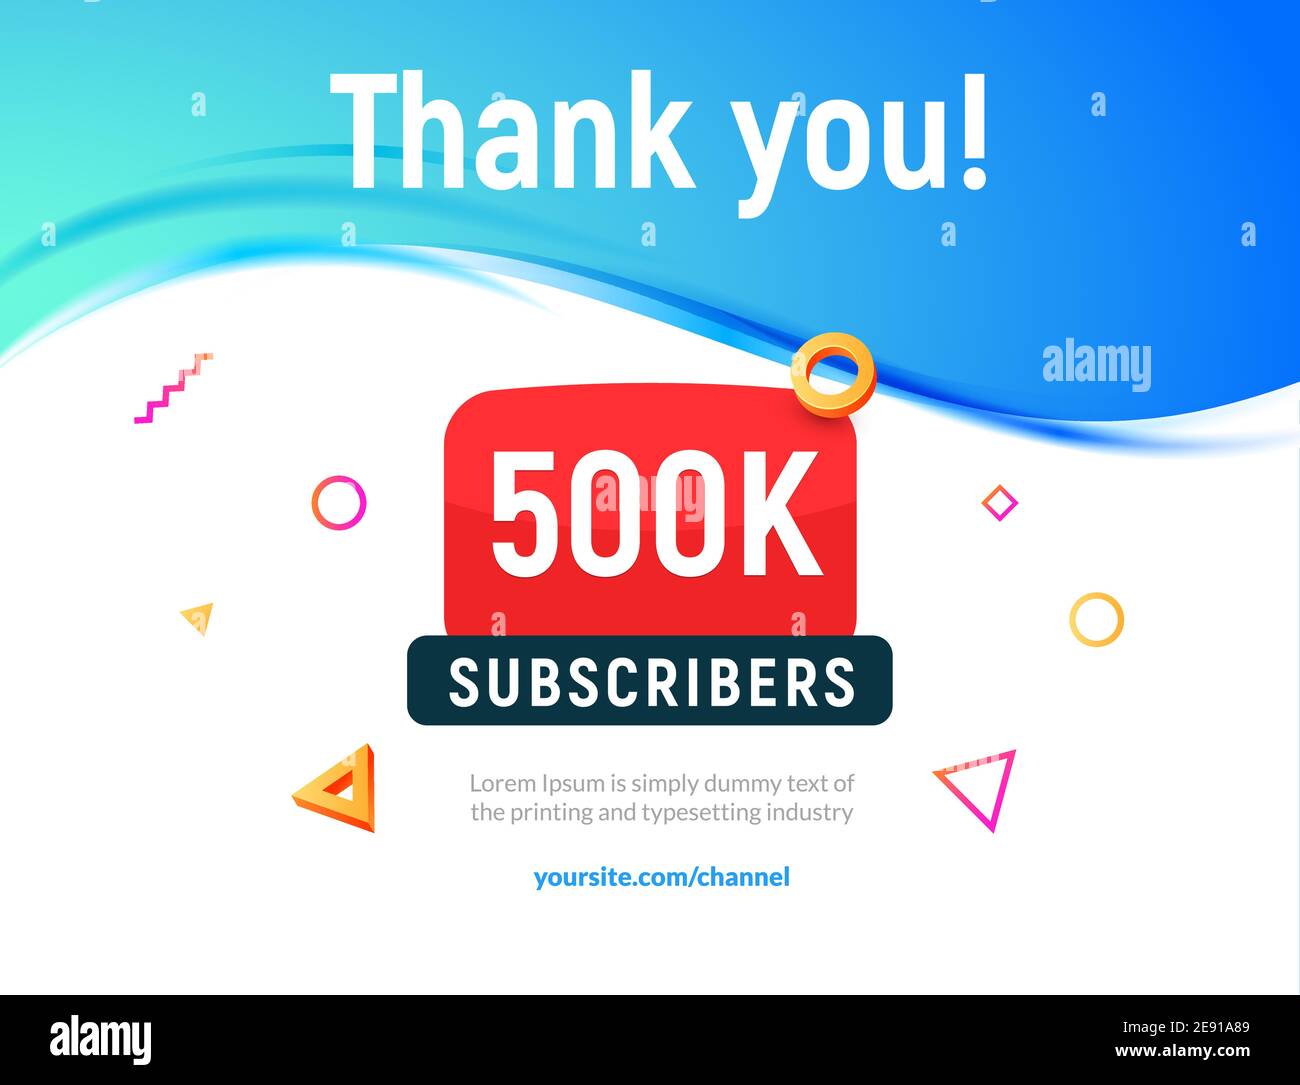 500000 SUBSCRIBERS LIVE COUNTING🥰, THANK YOU SO MUCH GUYS💓